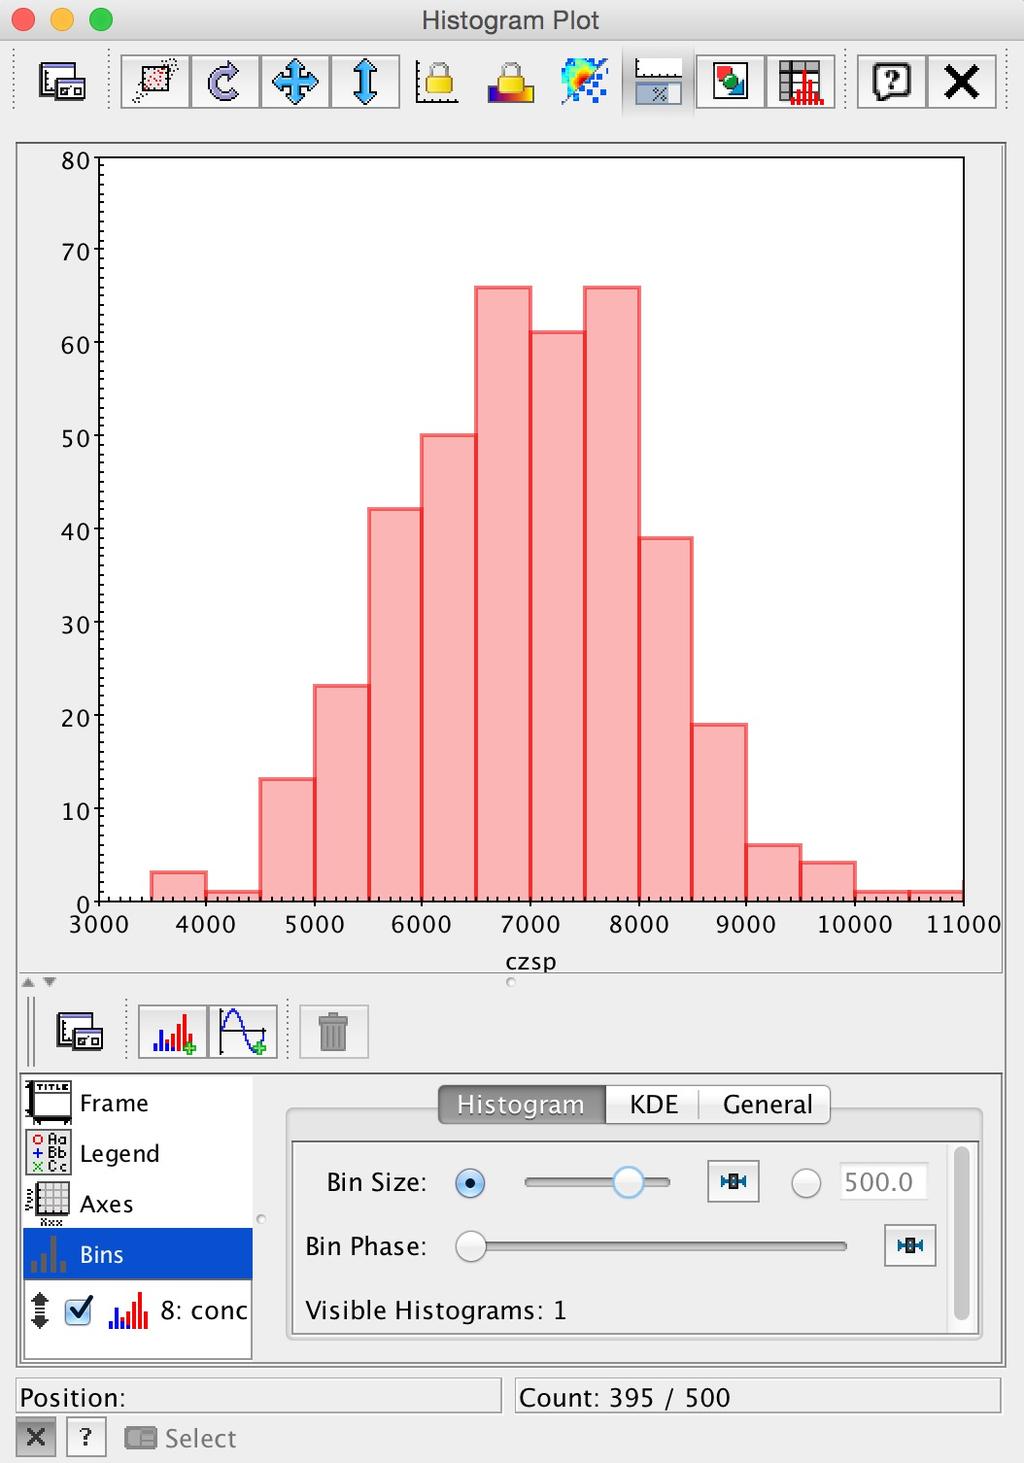 8 Determine the cz distribution, <cz> and dispersion in TOPCAT View the histogram of czsp values with Isolate the main peak of Coma in the histogram by